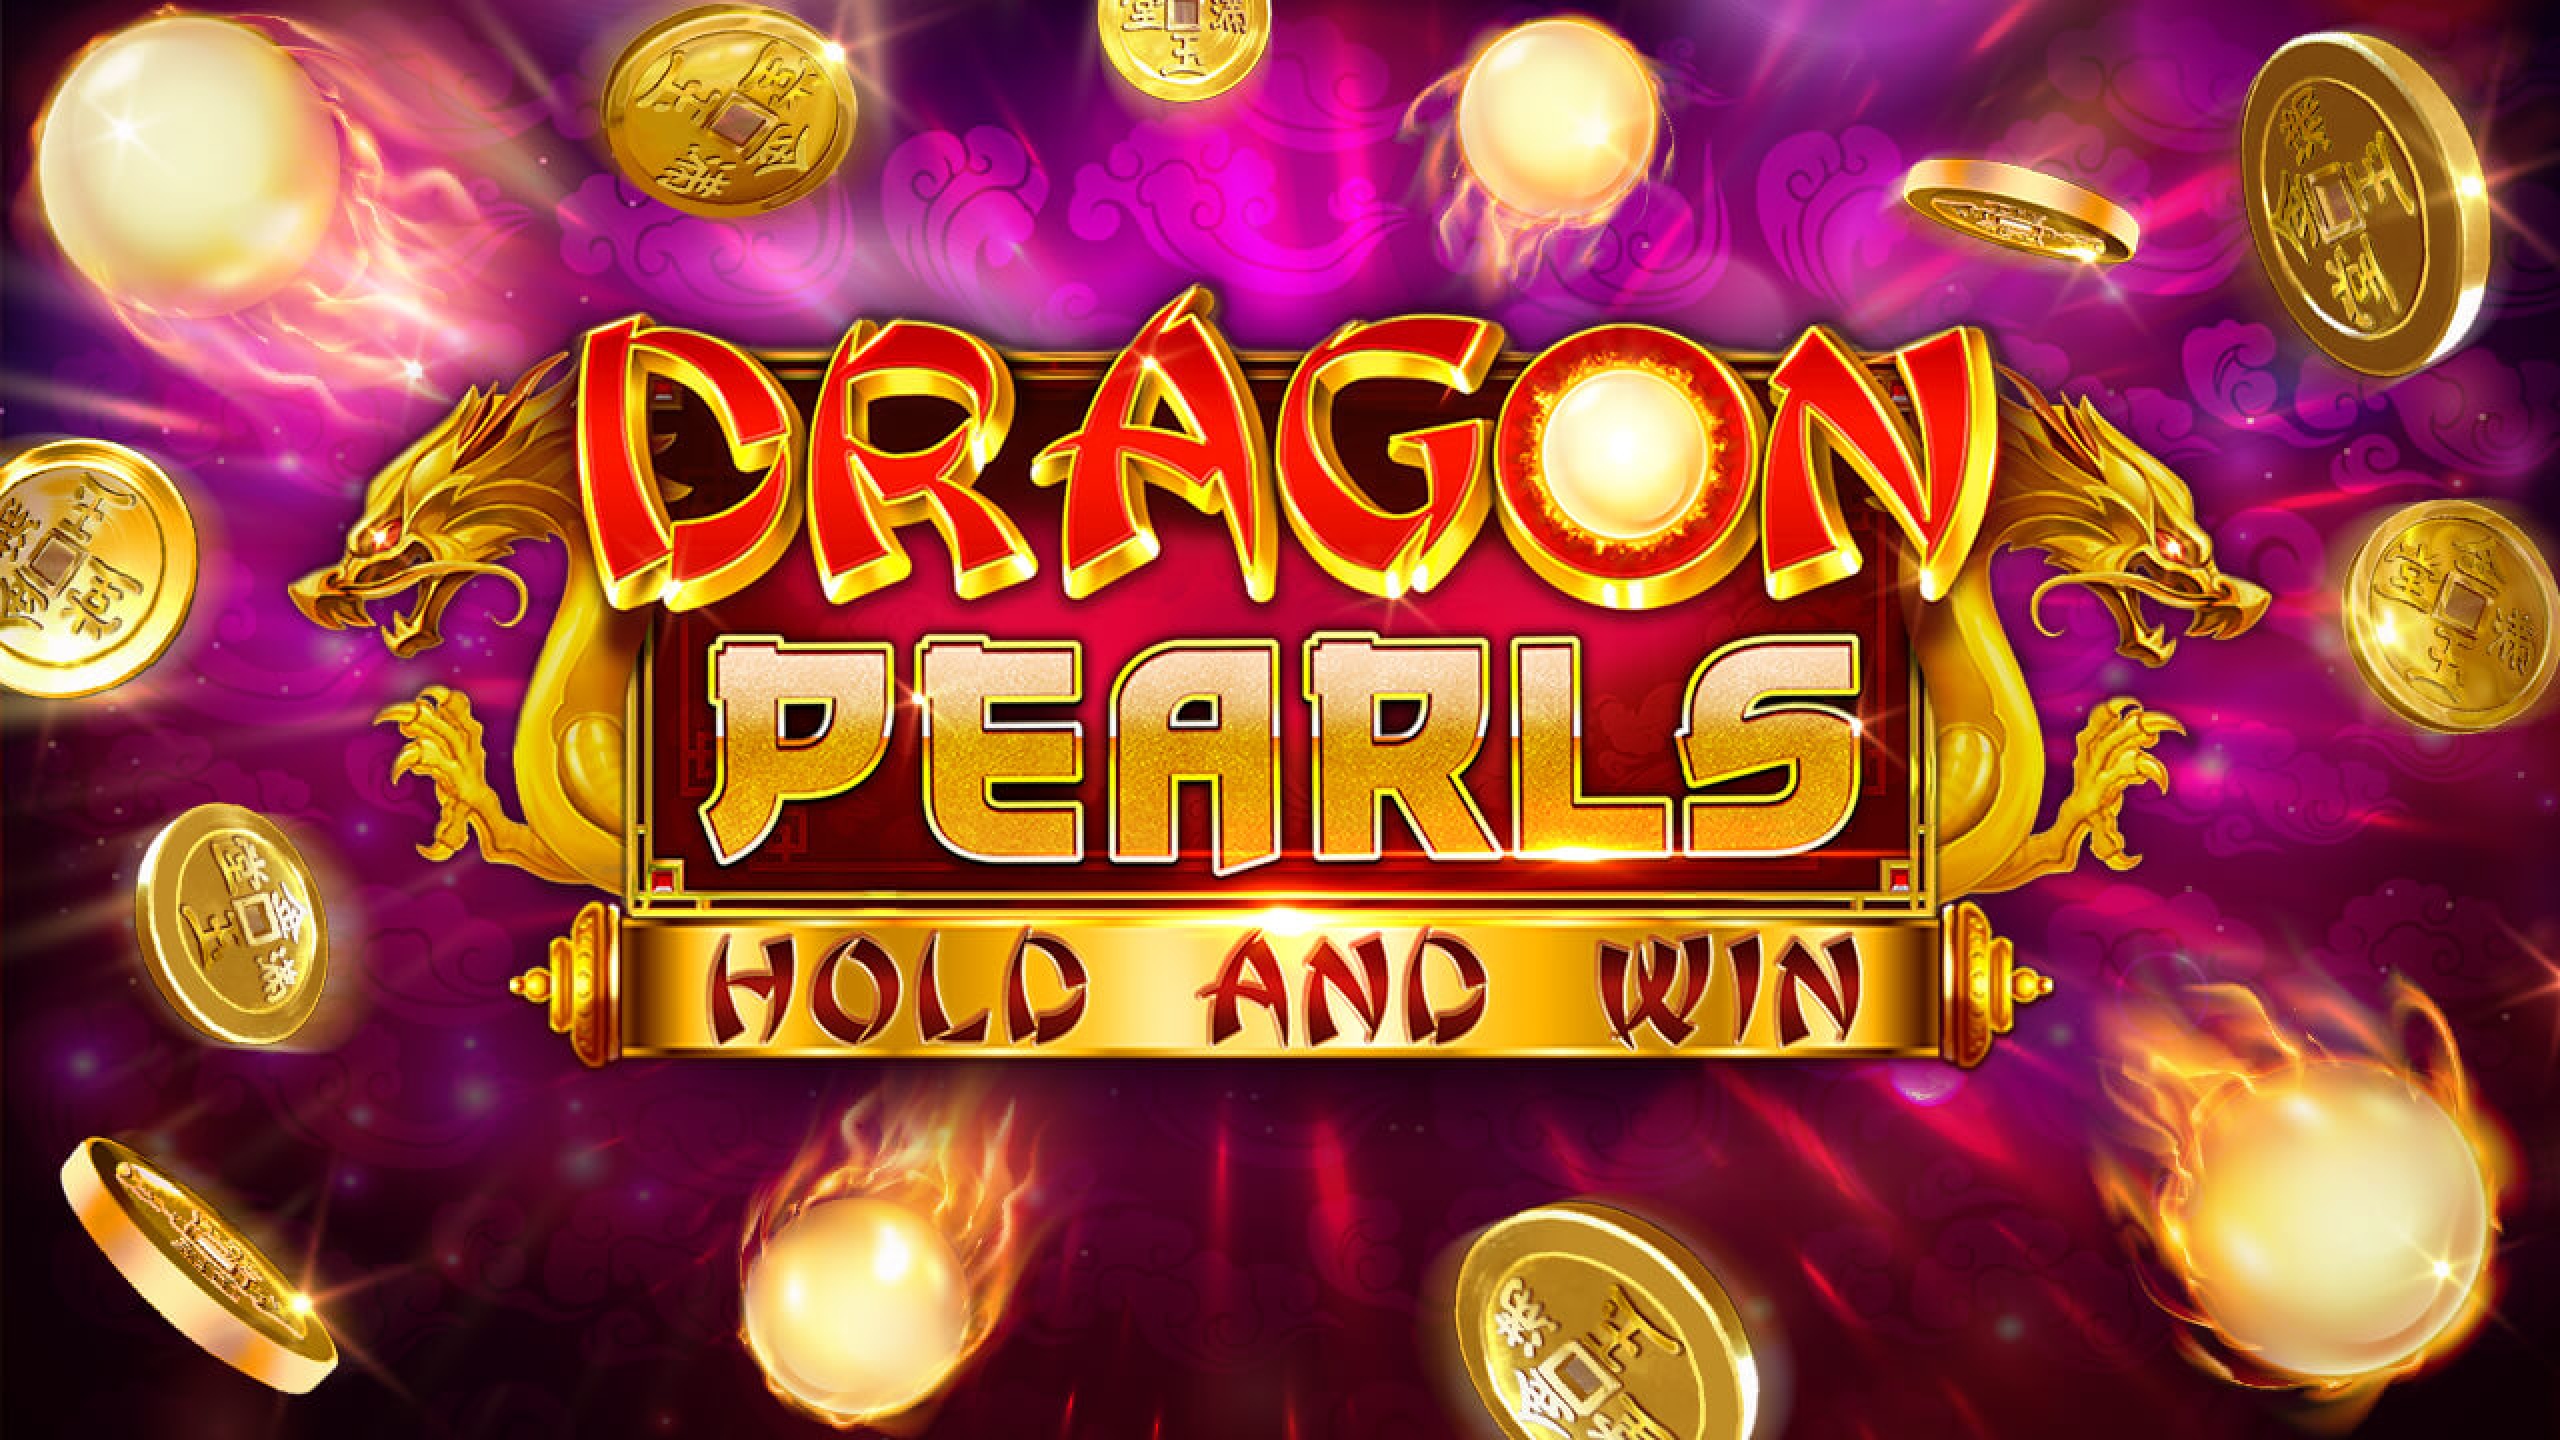 The Dragon Pearls: Hold & Win Online Slot Demo Game by Booongo Gaming